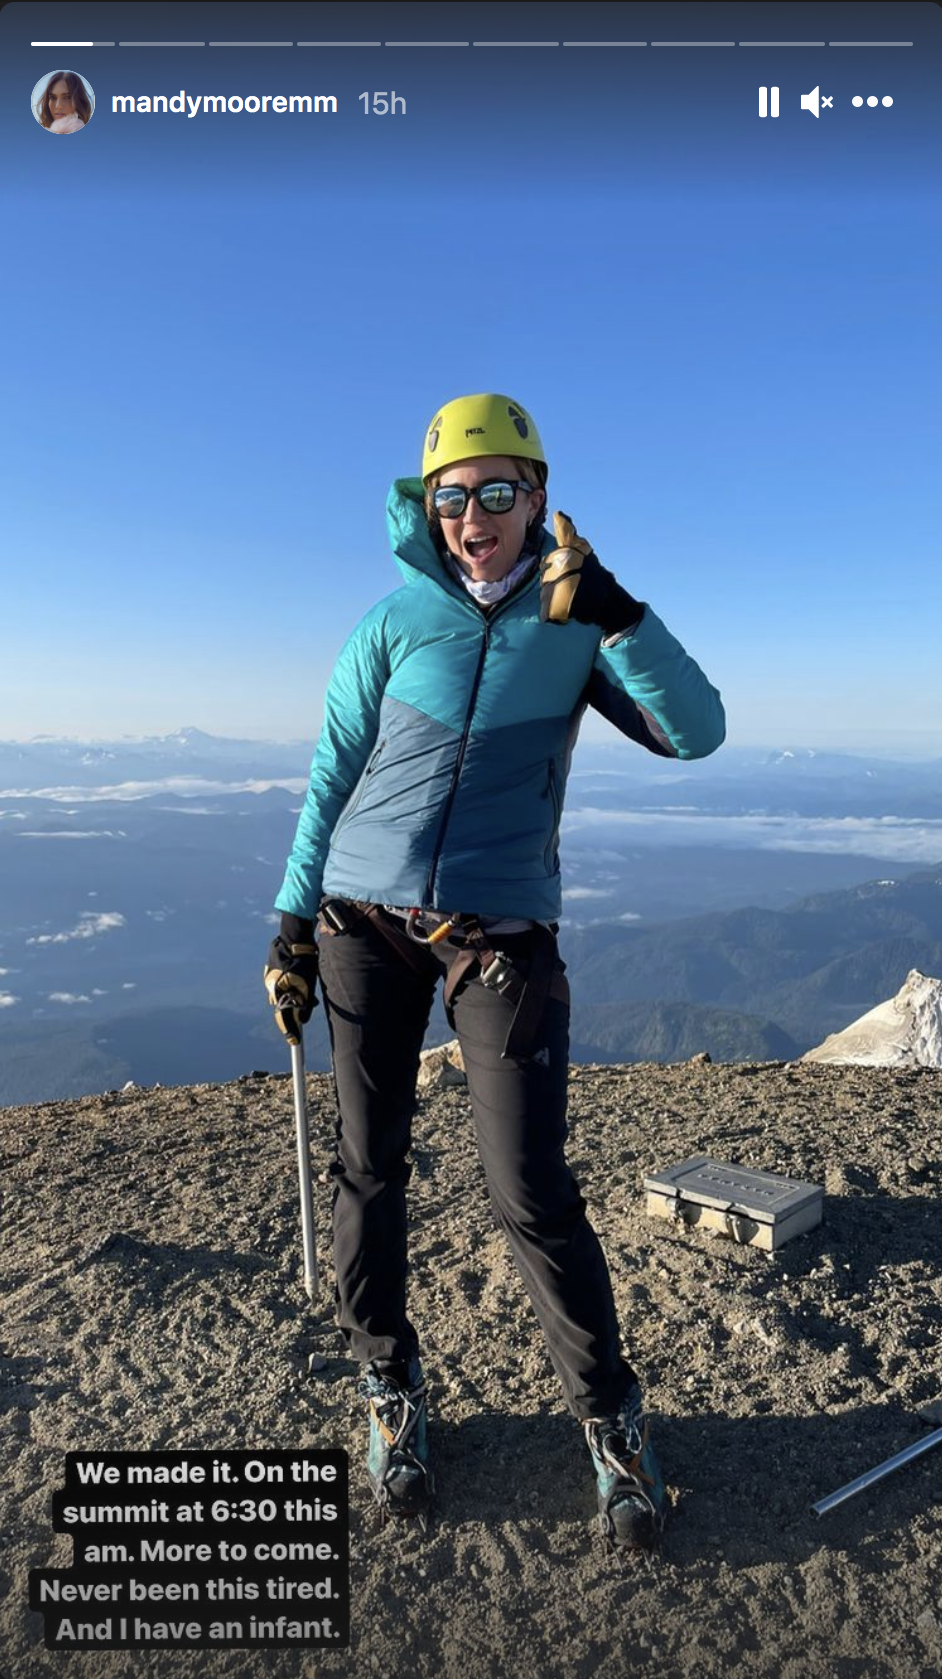 Mandy Moore gives a thumbs up from the summit of Mount Baker